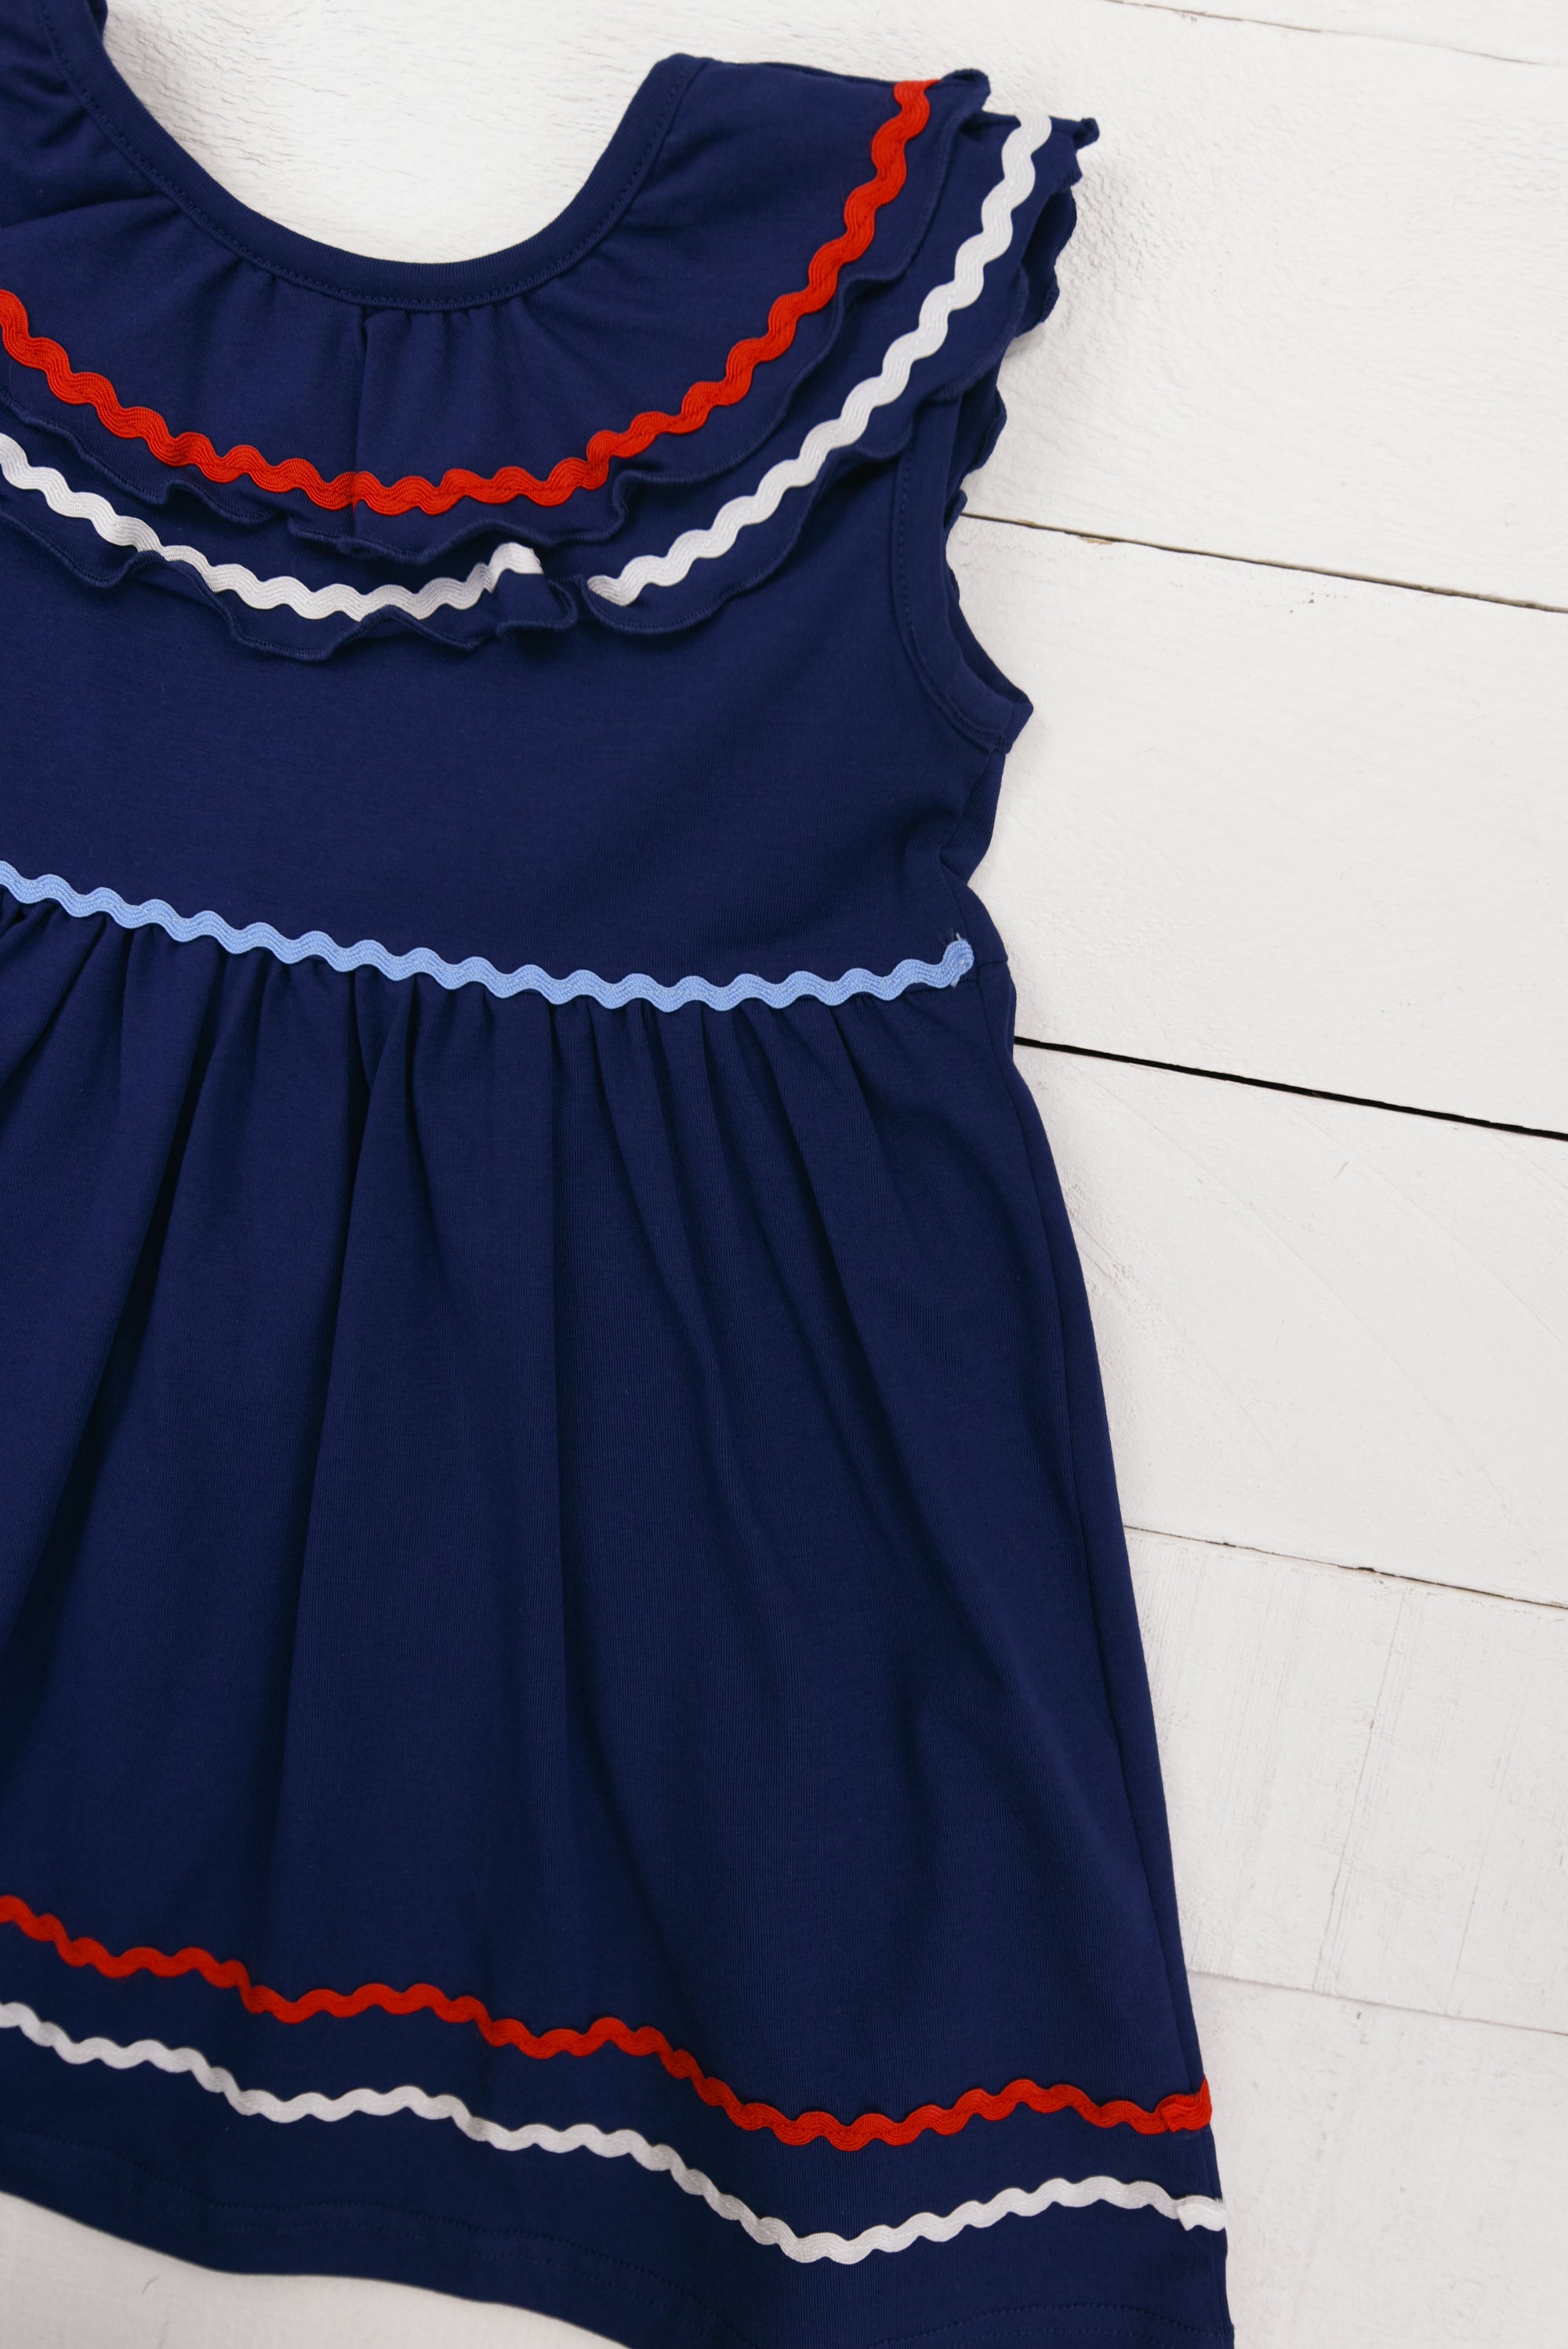 a blue dress with red, white, and blue stripes